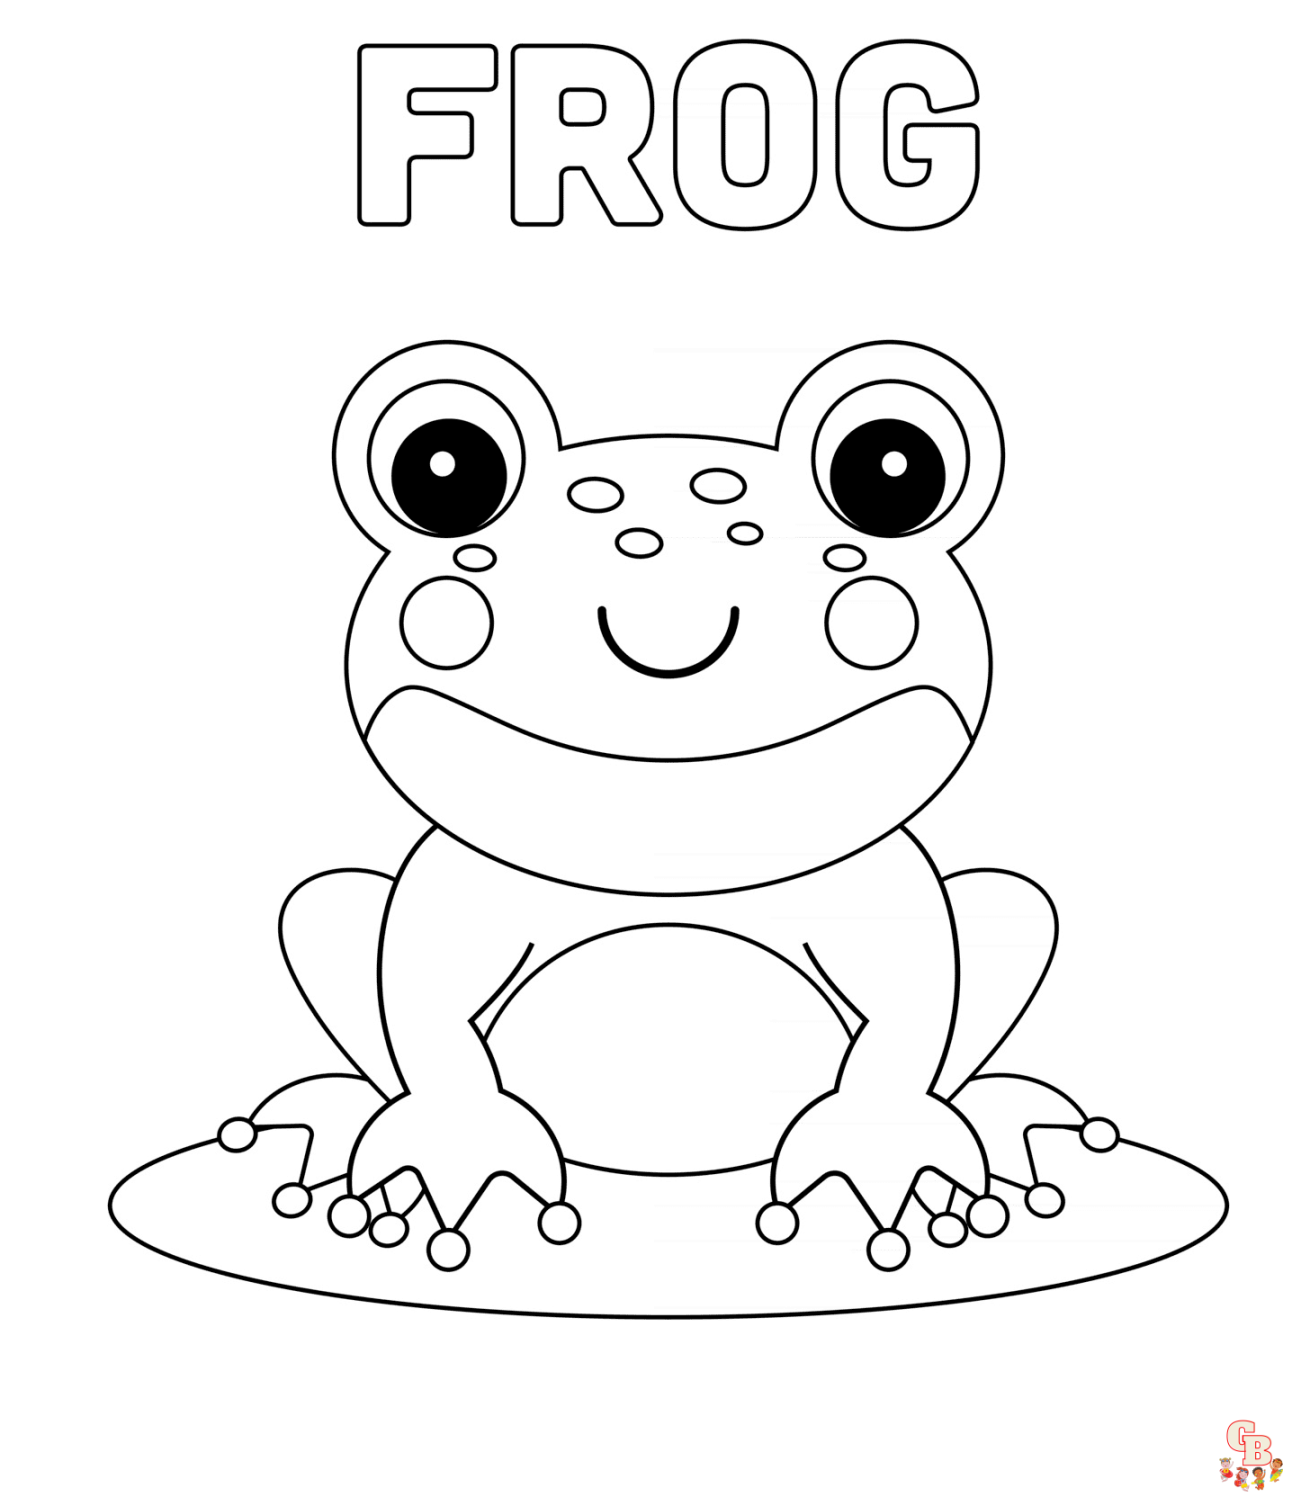 Cute Frog Coloring Pages: Free Printable Pages for Kids